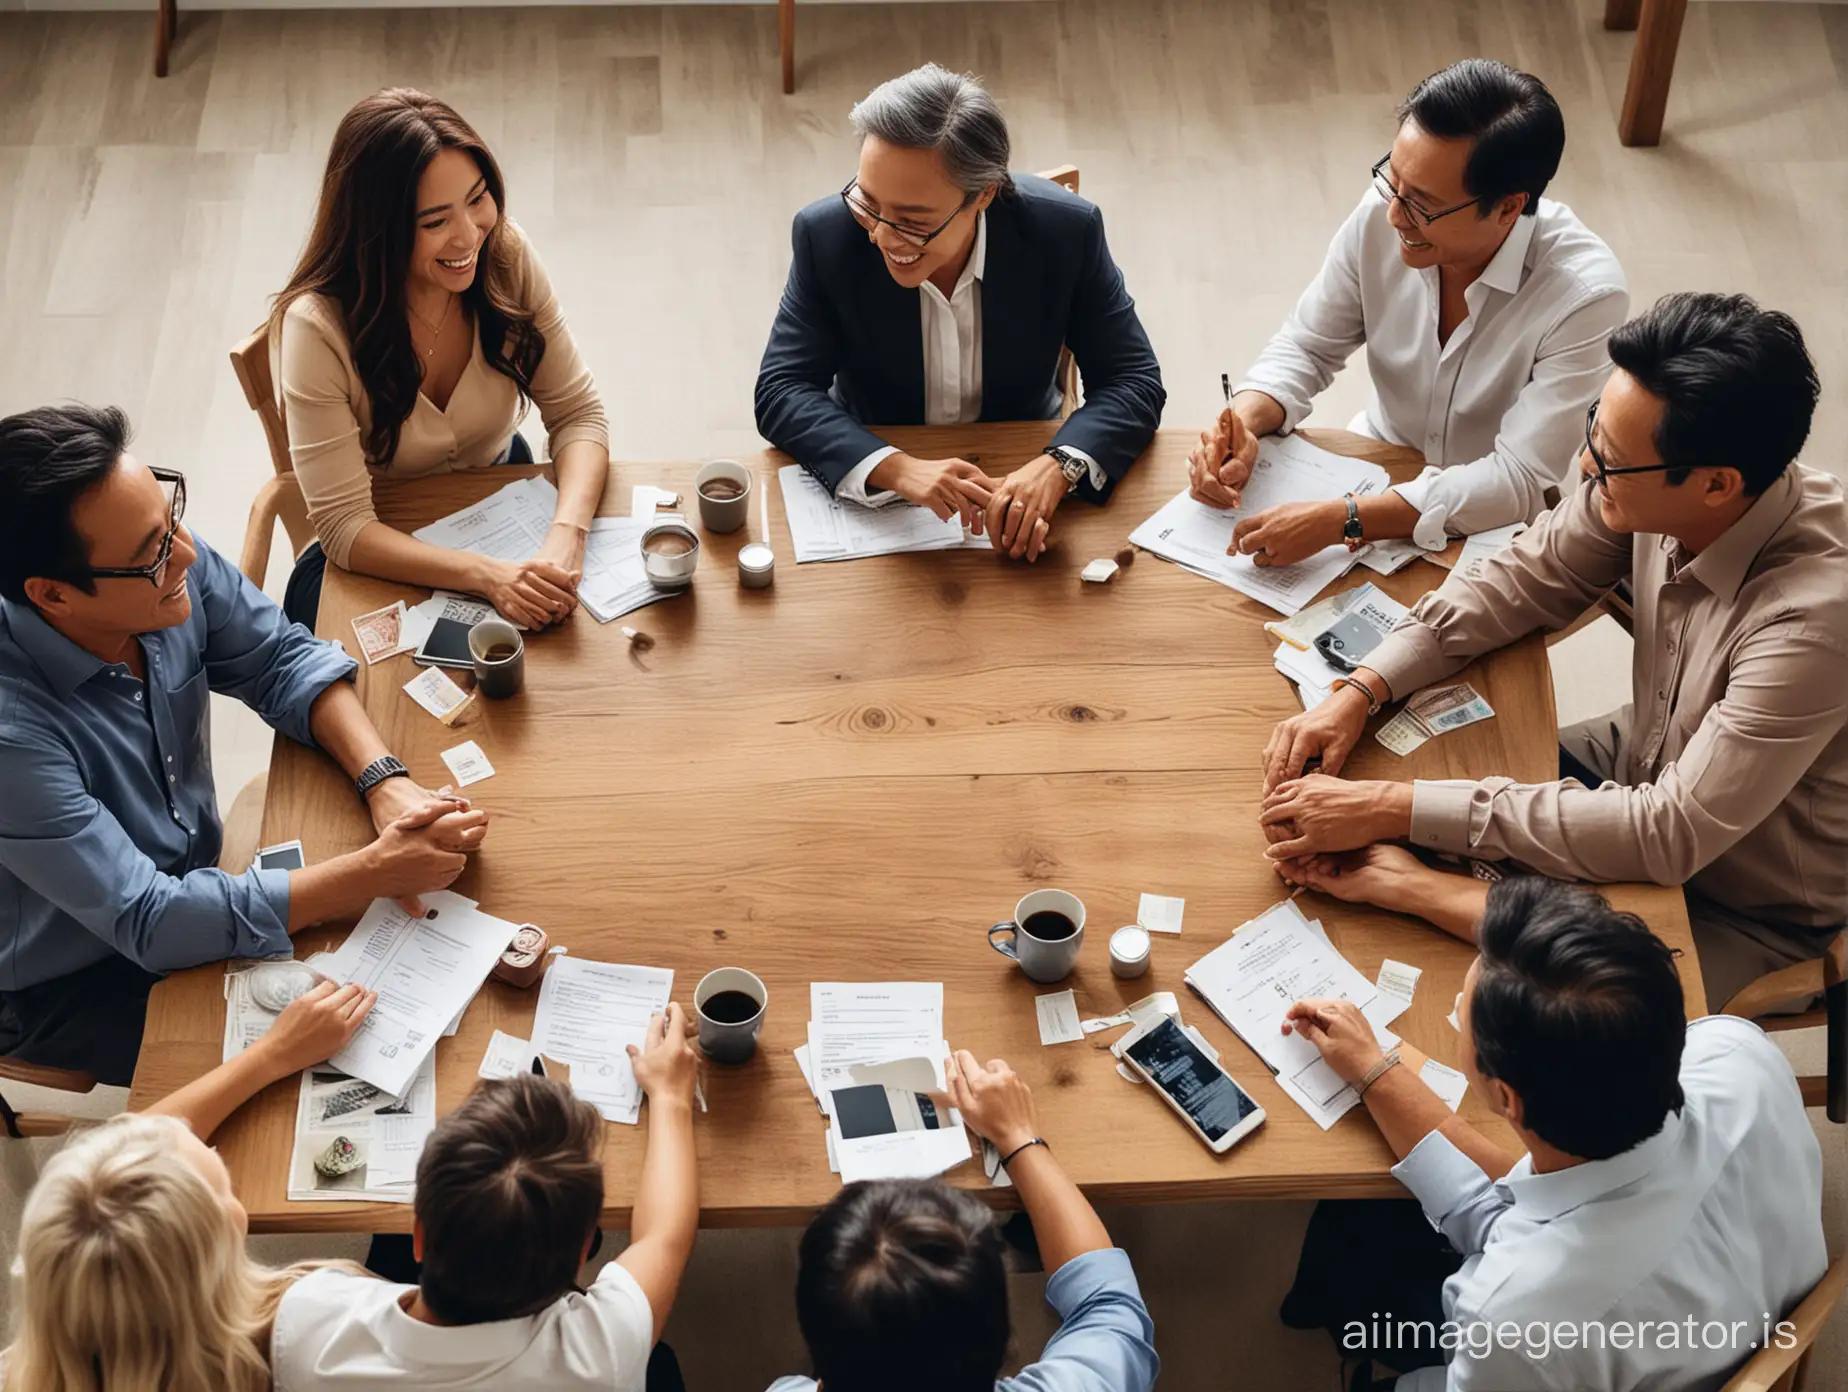 An image of a diverse group of people of different generations and races, engaged in a meaningful conversation around a table, symbolizing the importance of financial wisdom, long-term planning, and generational wealth. The photo captures a moment of shared knowledge and financial empowerment, echoing the insightful words of Robert Kiyosaki.